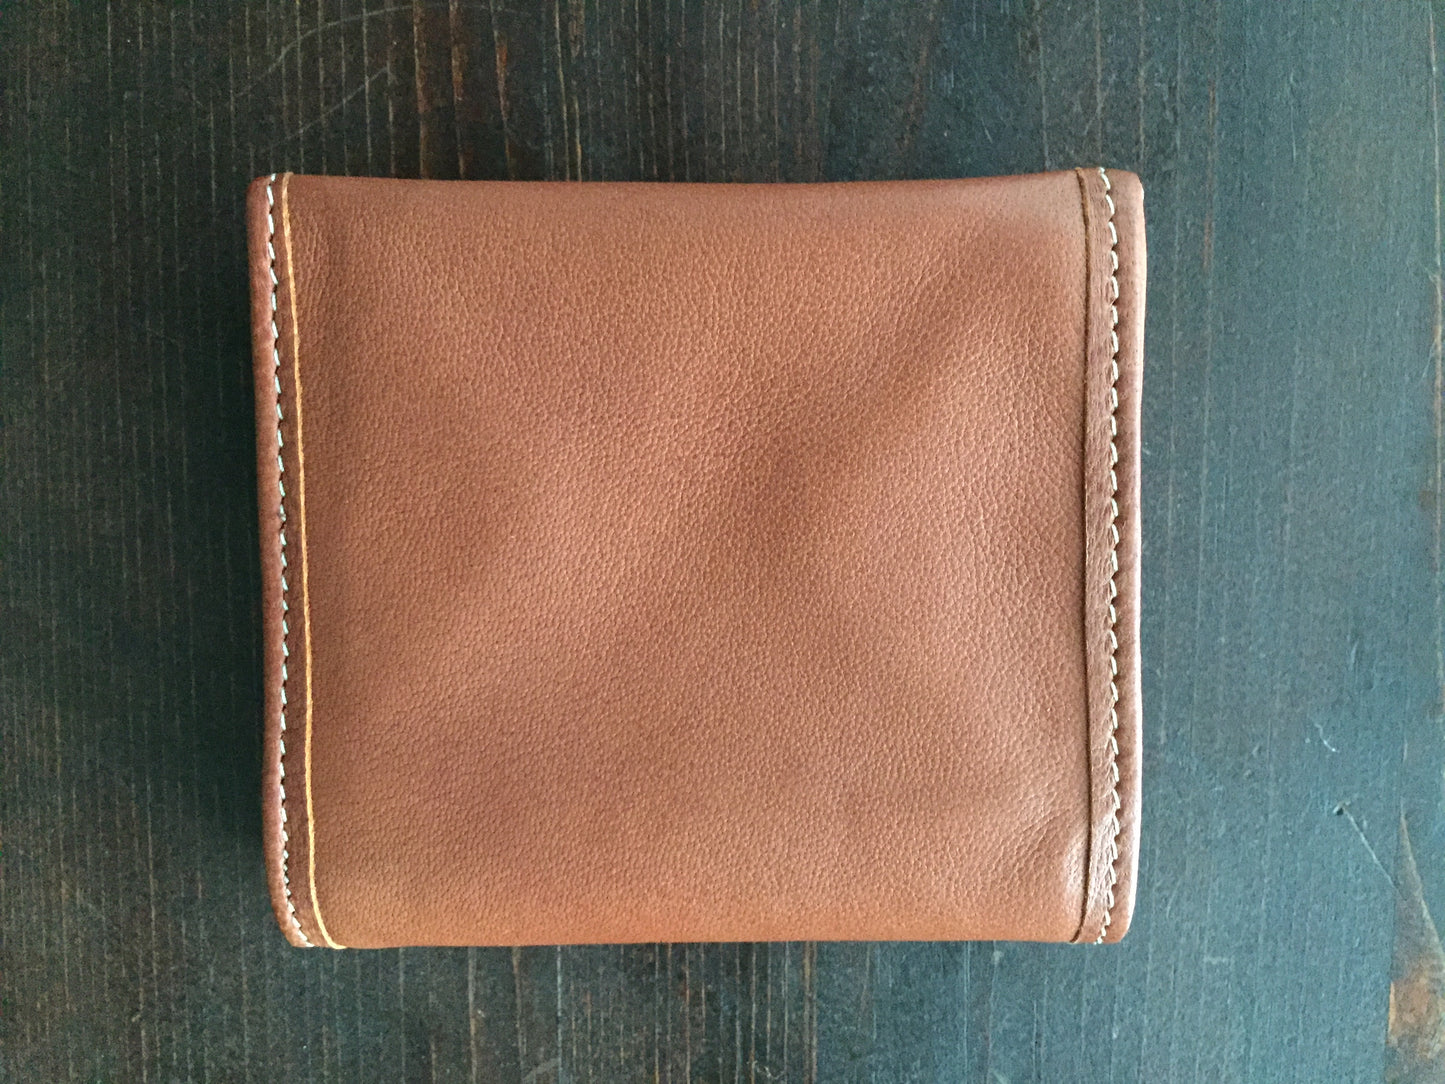 Handmade Leather Wallet with Hand Embroidery - Euro Wallet - Dandarah